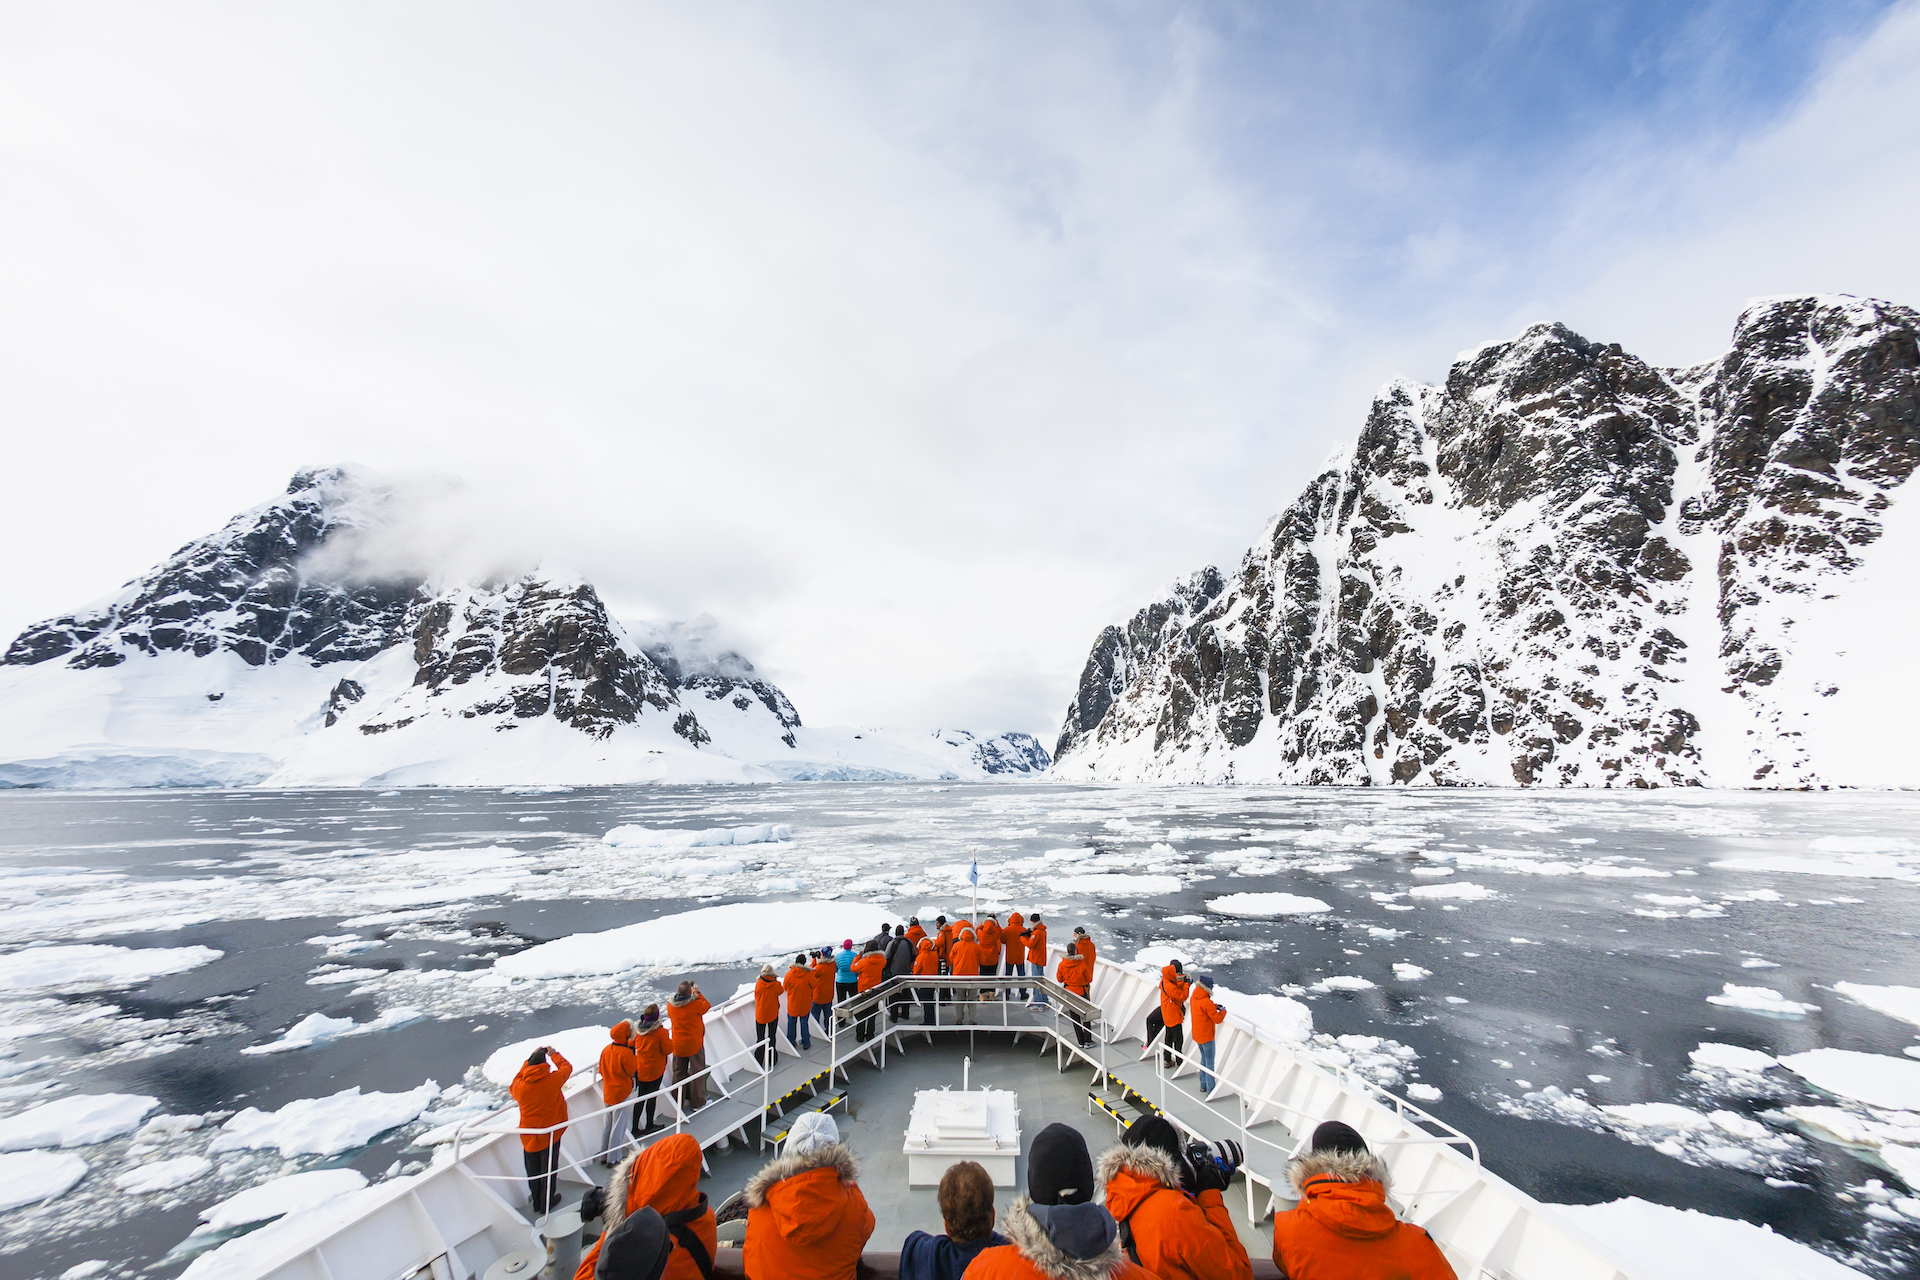 50 amazing facts about Antarctica